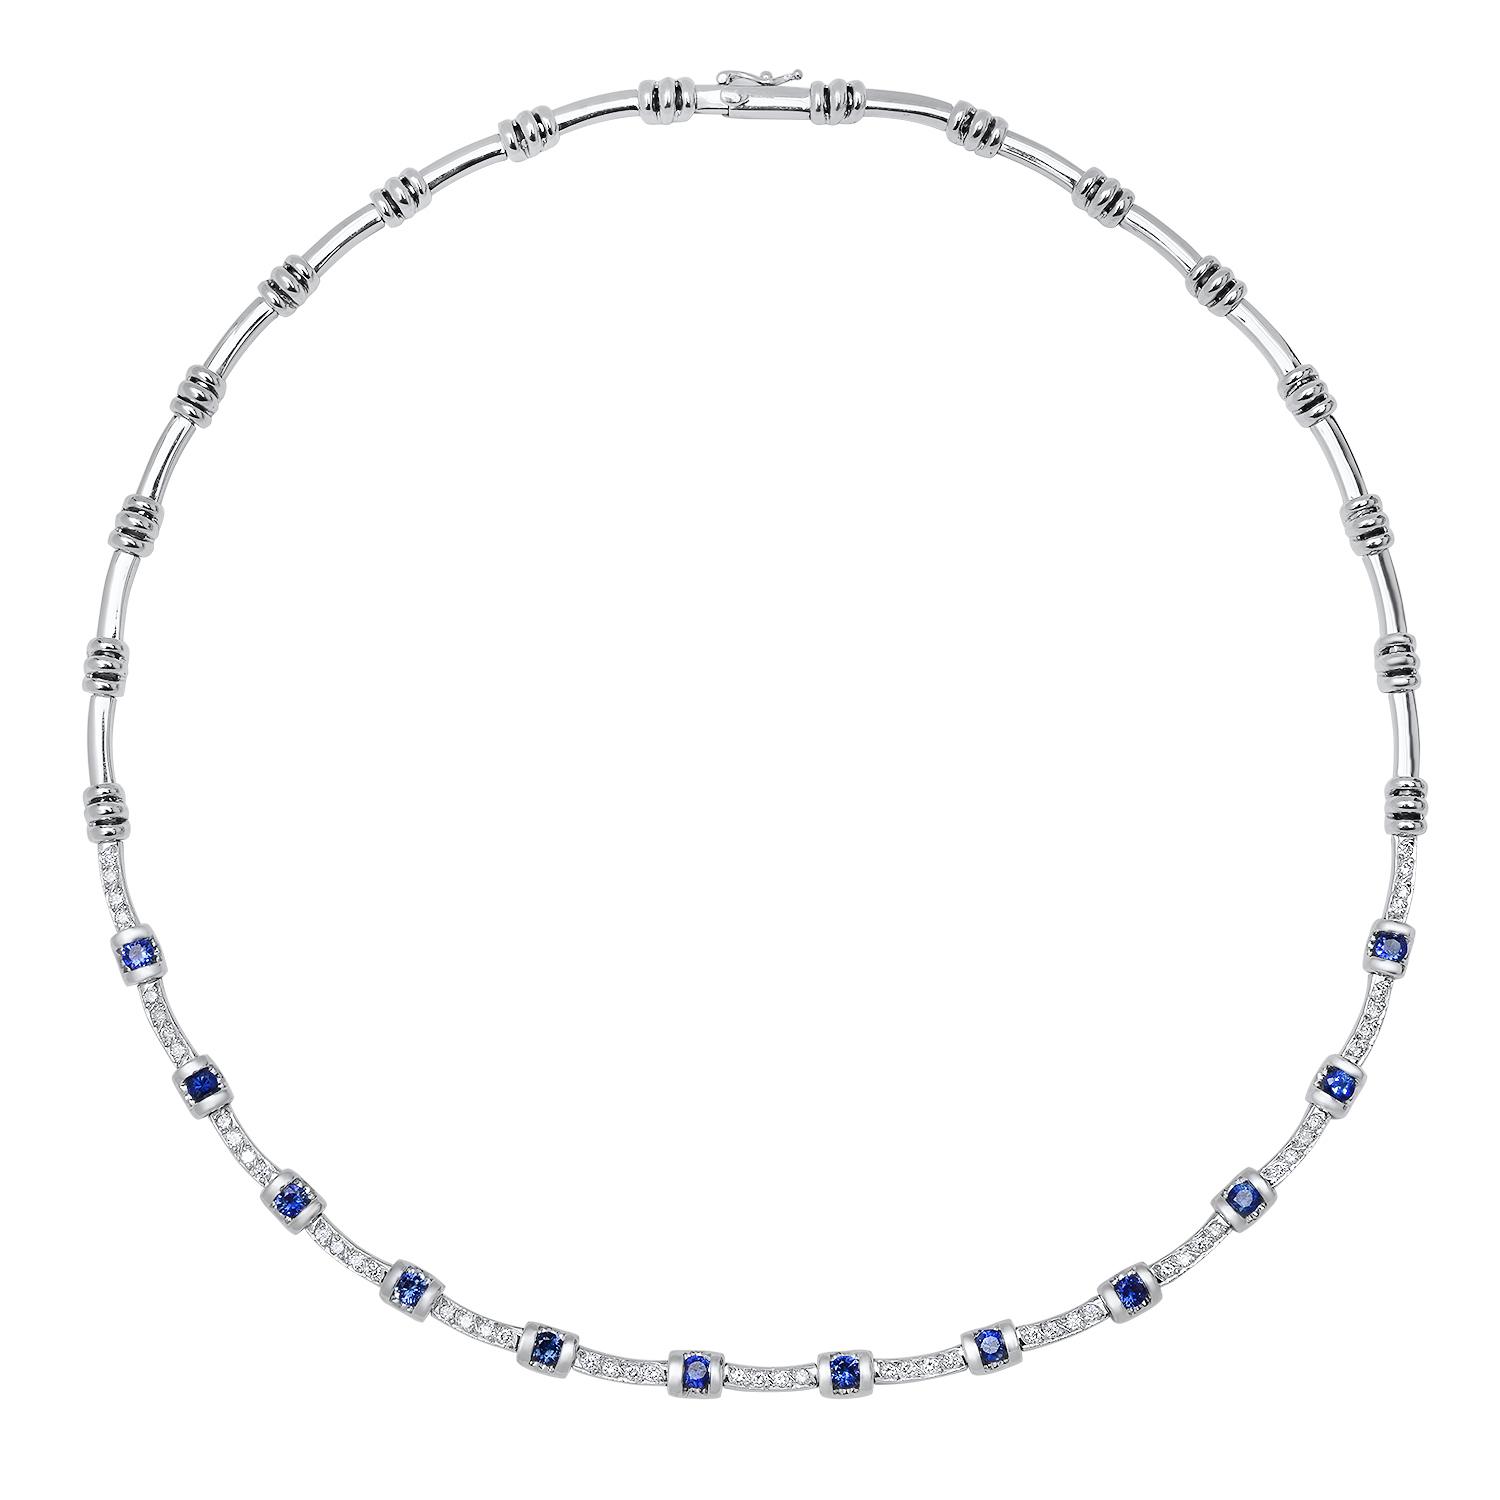 18K White Gold Setting with 1.86ct Sapphire and 1.38ct Diamond Necklace